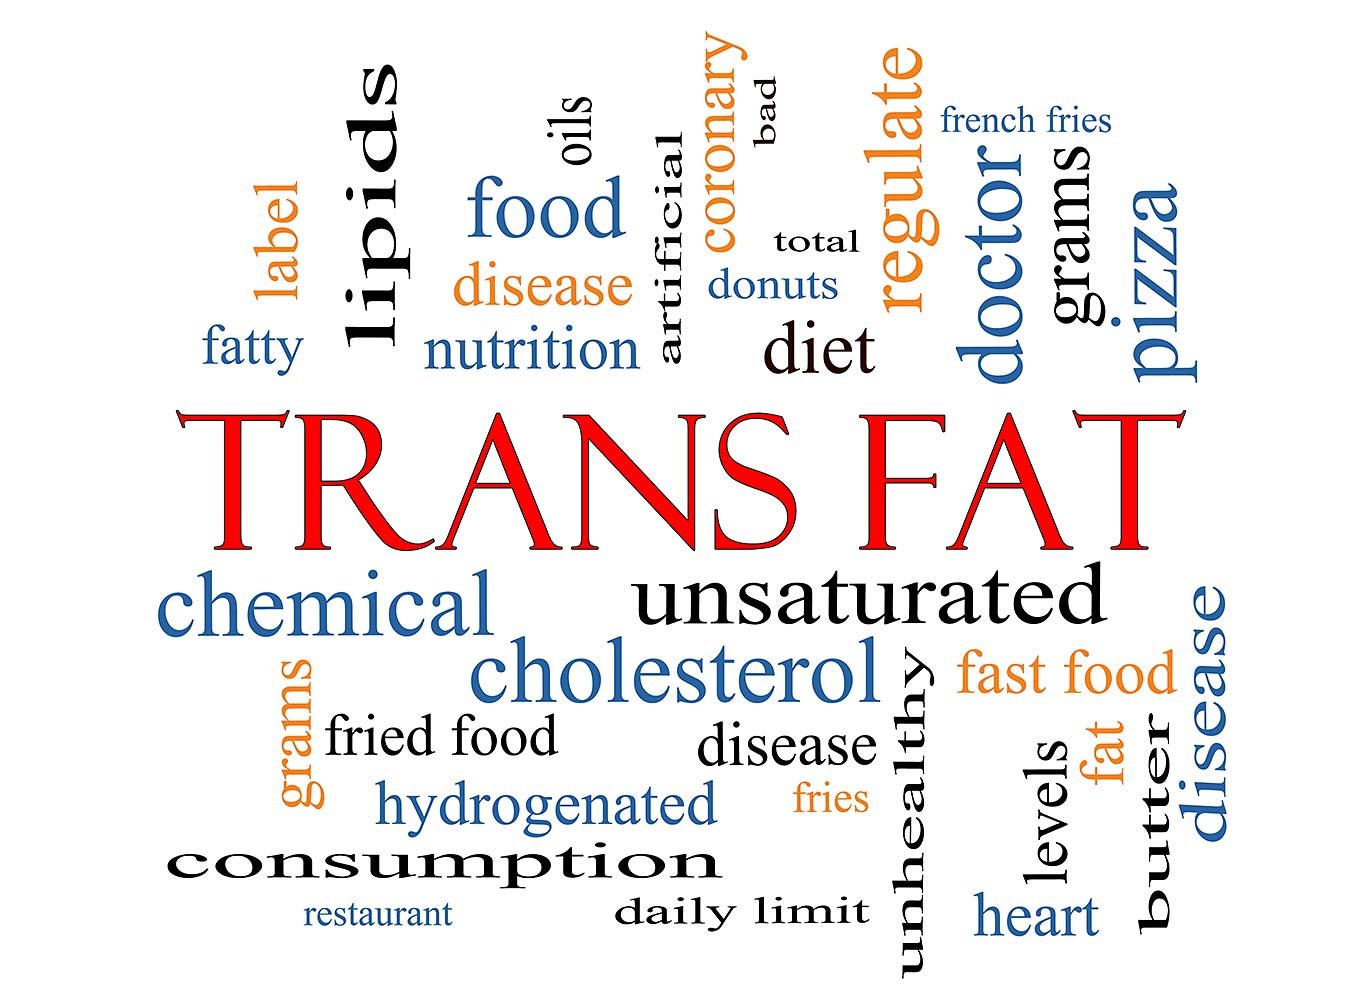 civil-society-expresses-concern-over-trans-fats-reduction-law